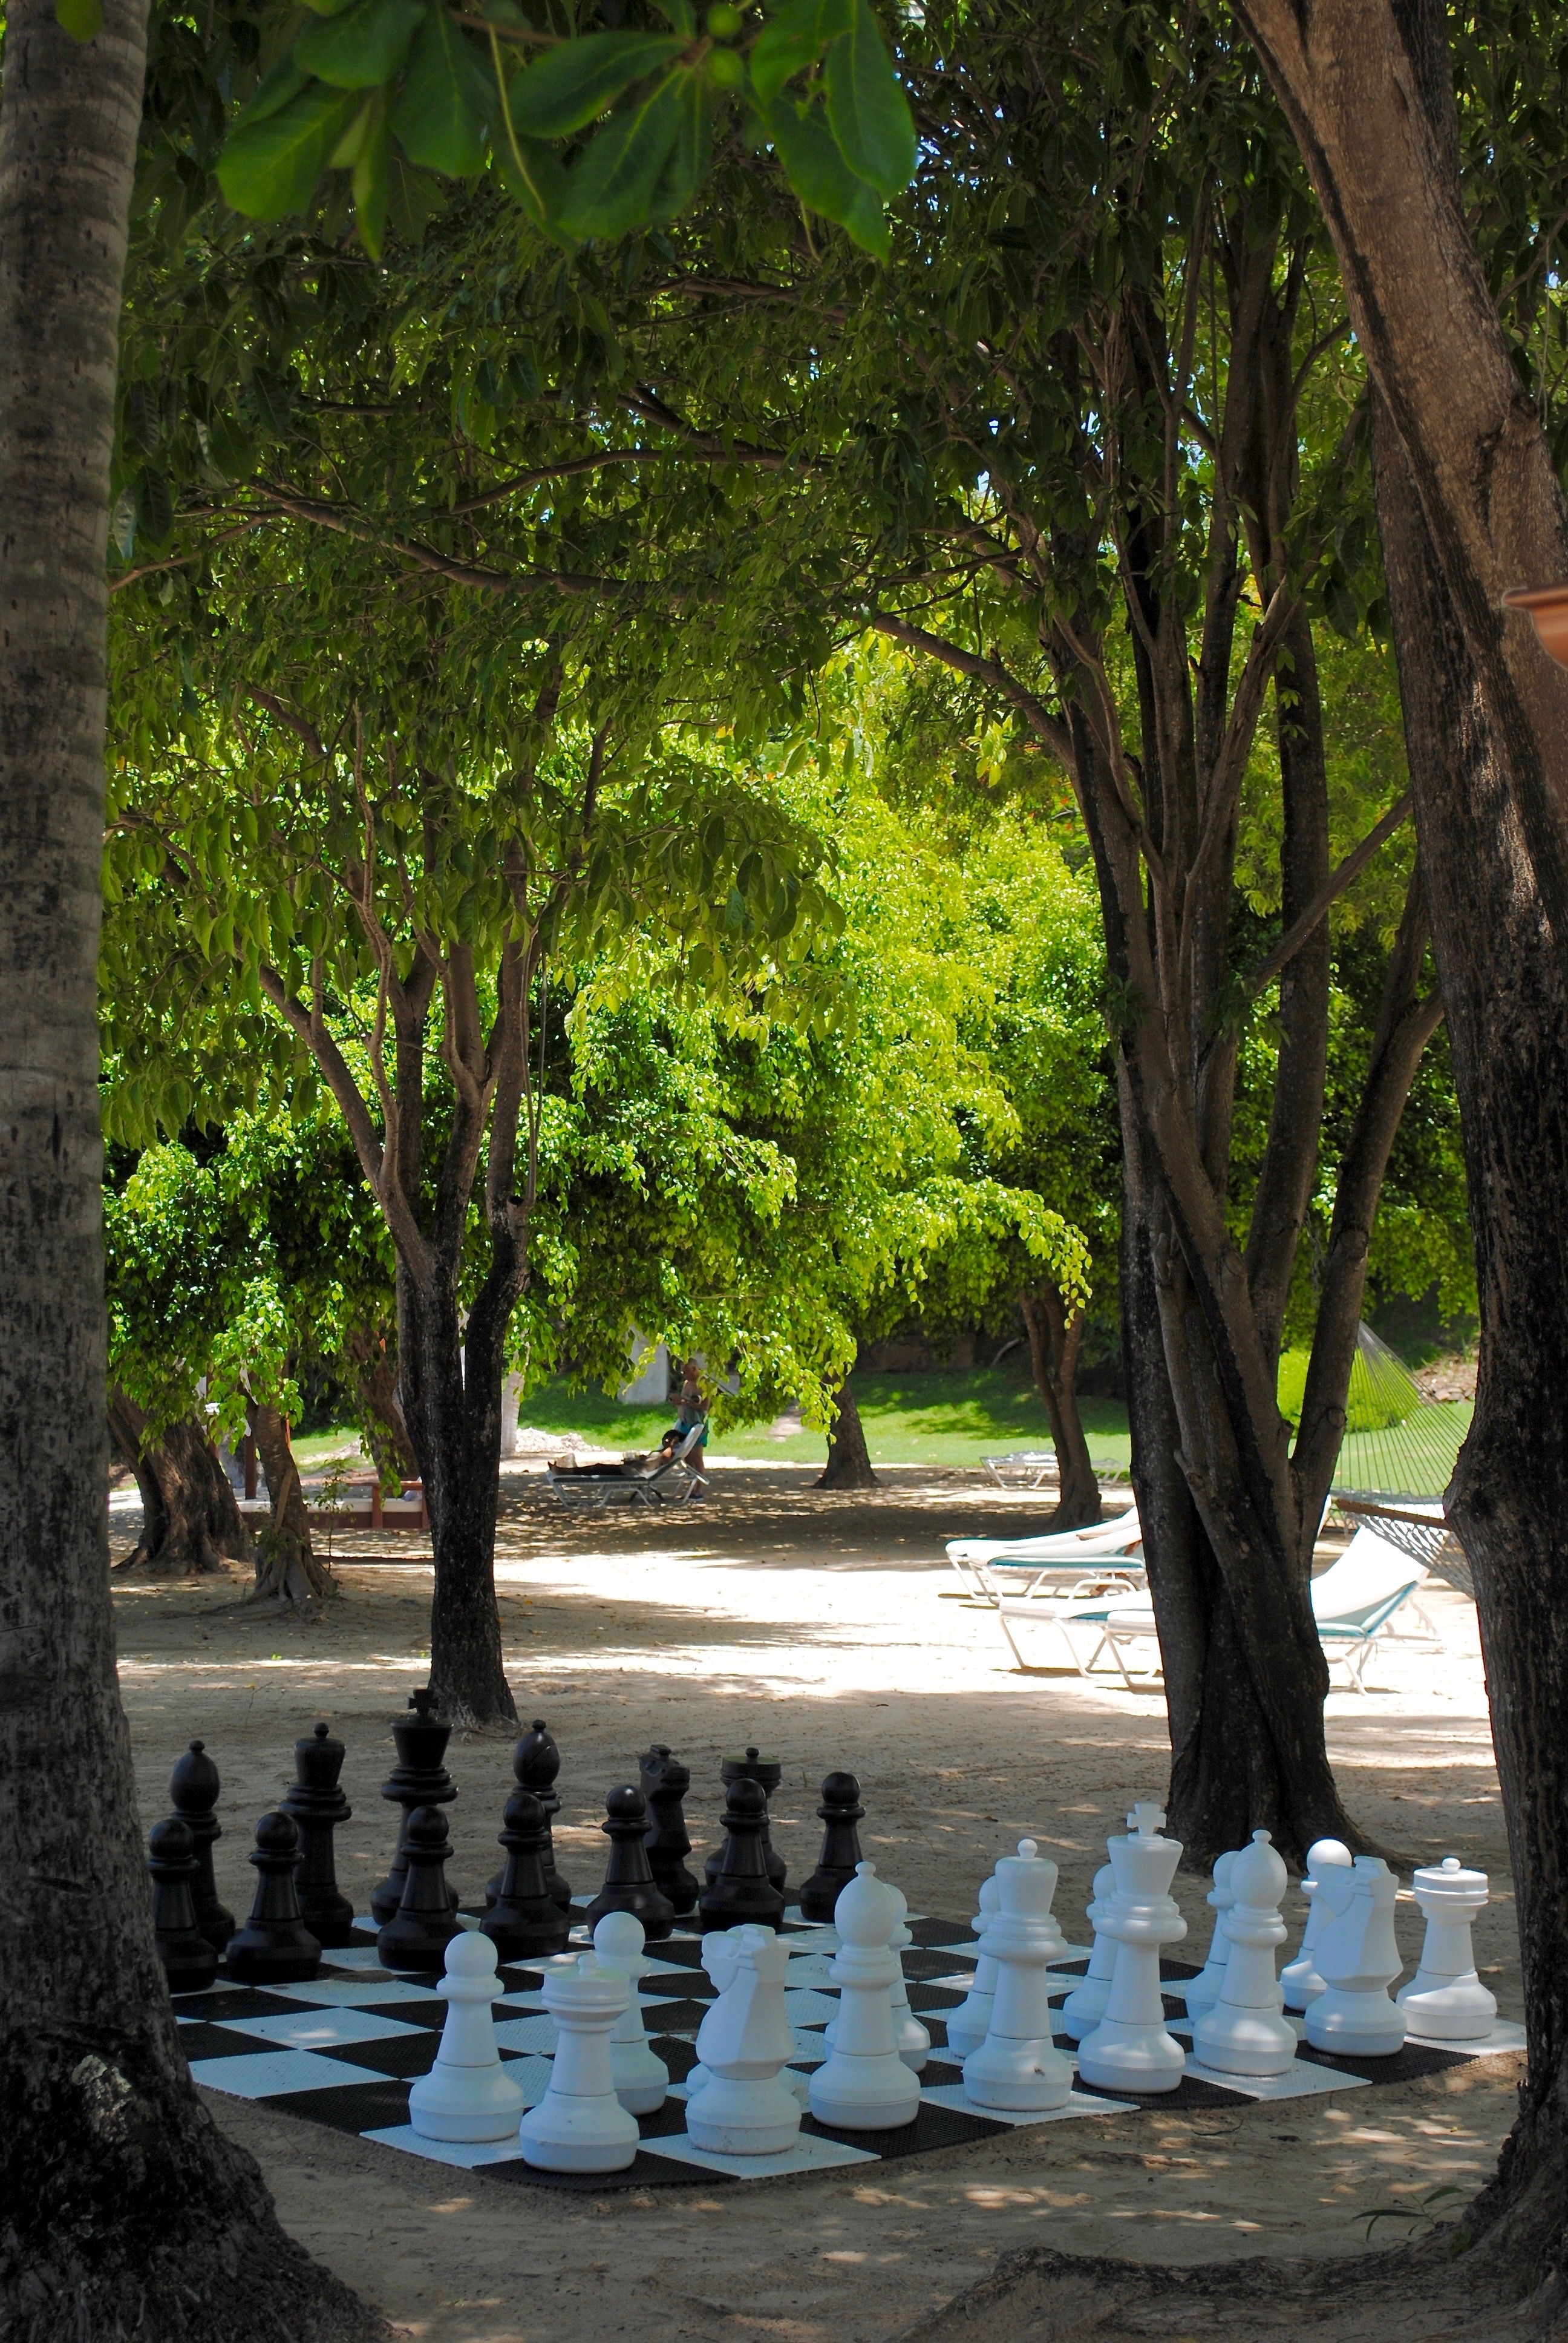 white and black chess board